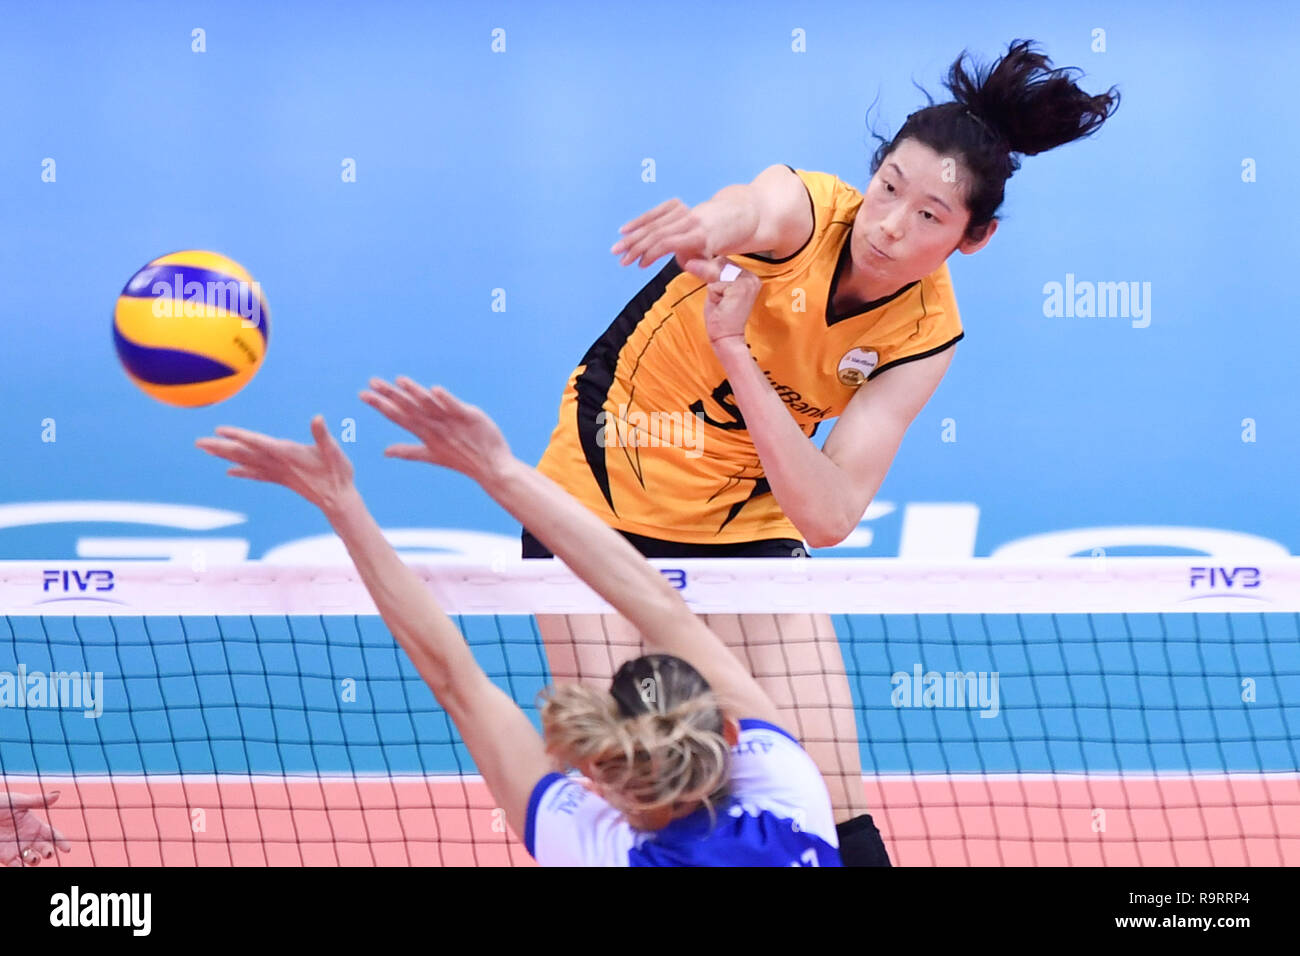 181228) -- BEIJING, Dec. 28, 2018 (Xinhua) -- File photo taken on Dec. 9,  2018 shows Zhu Ting (Top) of Vakifbank Istanbul spikes the ball during the  final match between Vakifbank Istanbul